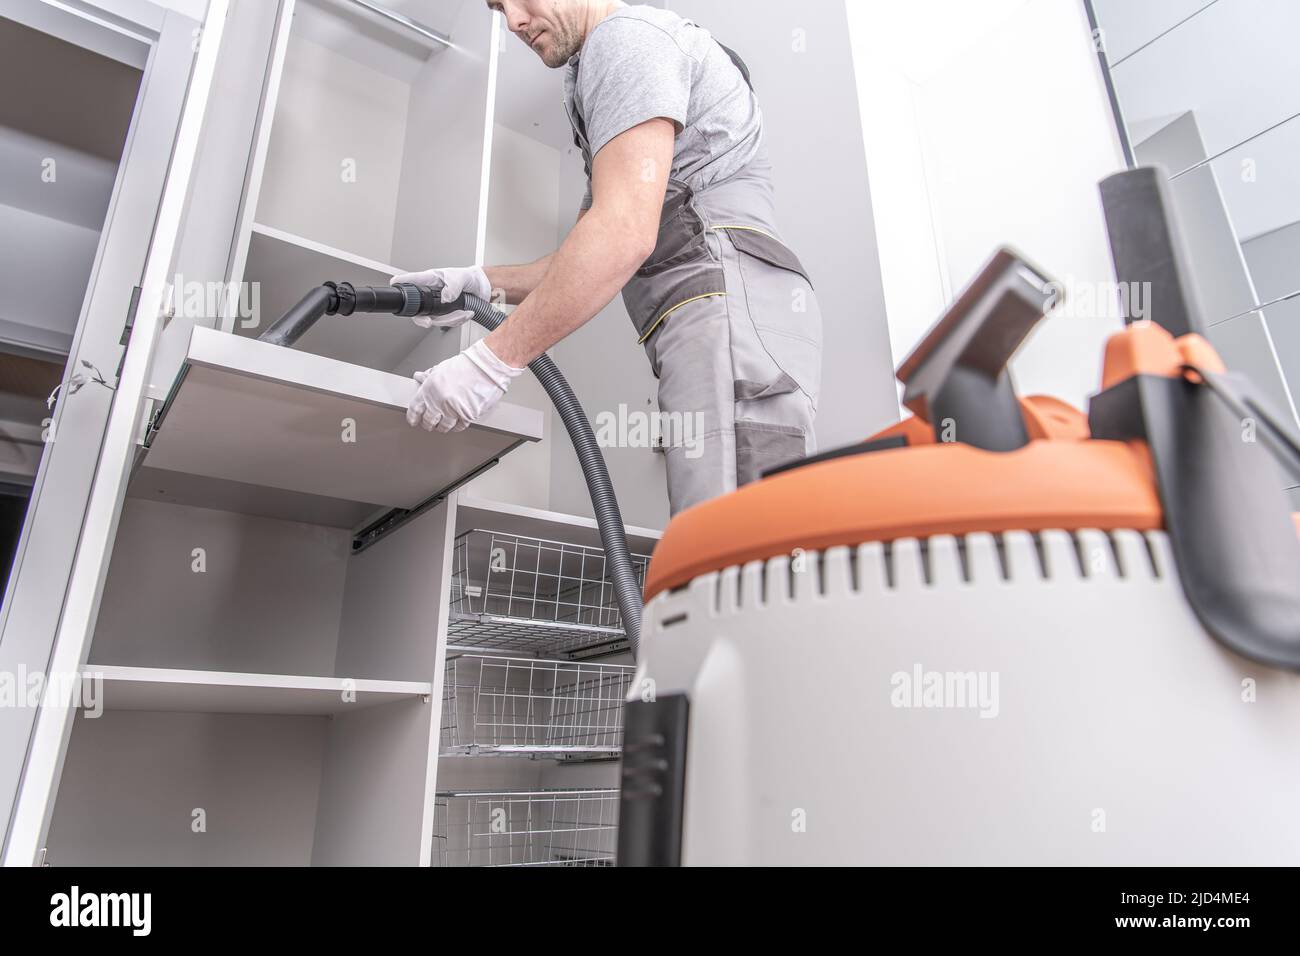 Caucasian Male Worker Vacuuming Shelf in Newly Assembled Large Wardrobe After Finishing the Installation Work in Client’s Residential House. Stock Photo